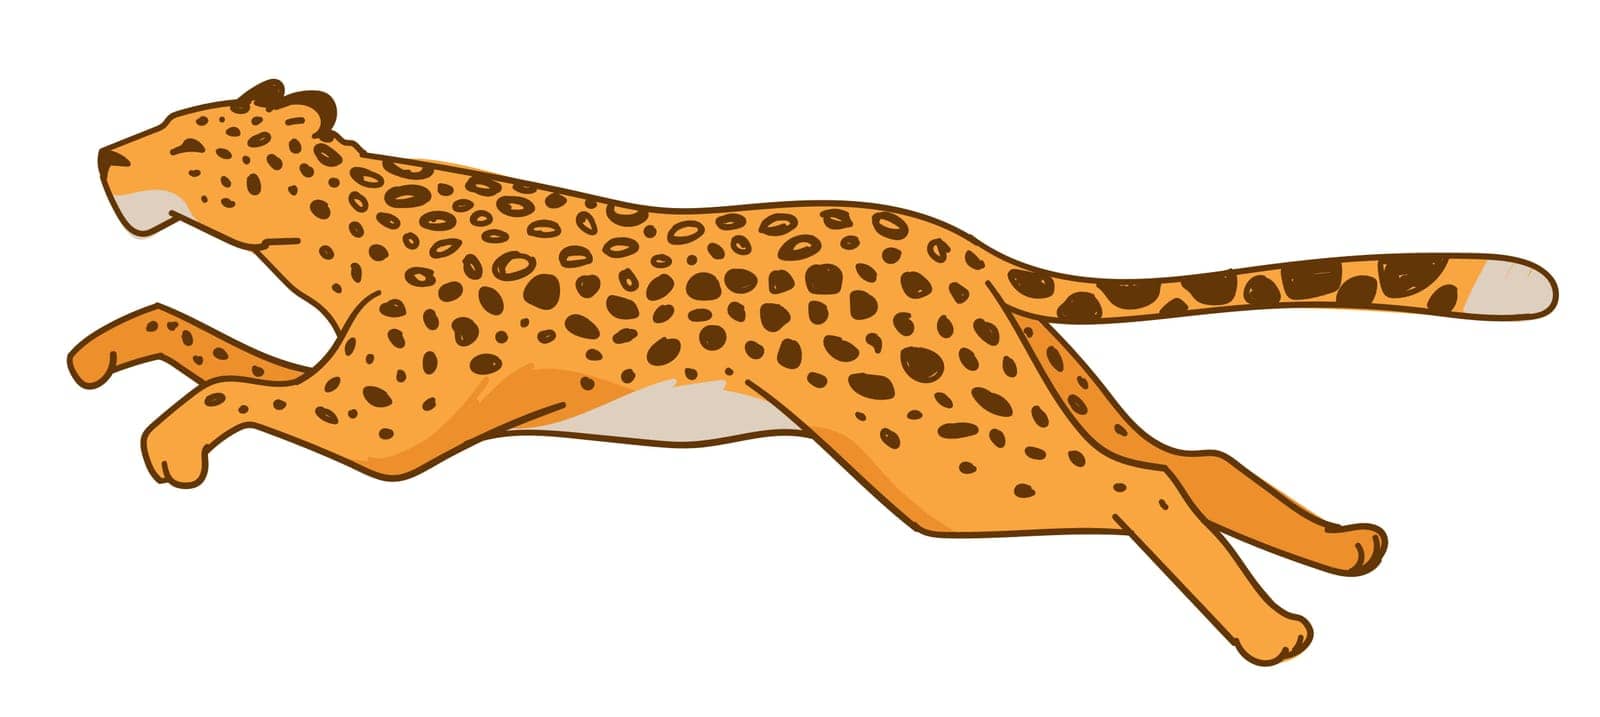 Wild animal running, isolated leopard or cheetah in motion. Exotic big cat with spots on fur, carnivore mammal hunting. Jaguar character moving body, predator and wilderness. Vector in flat style